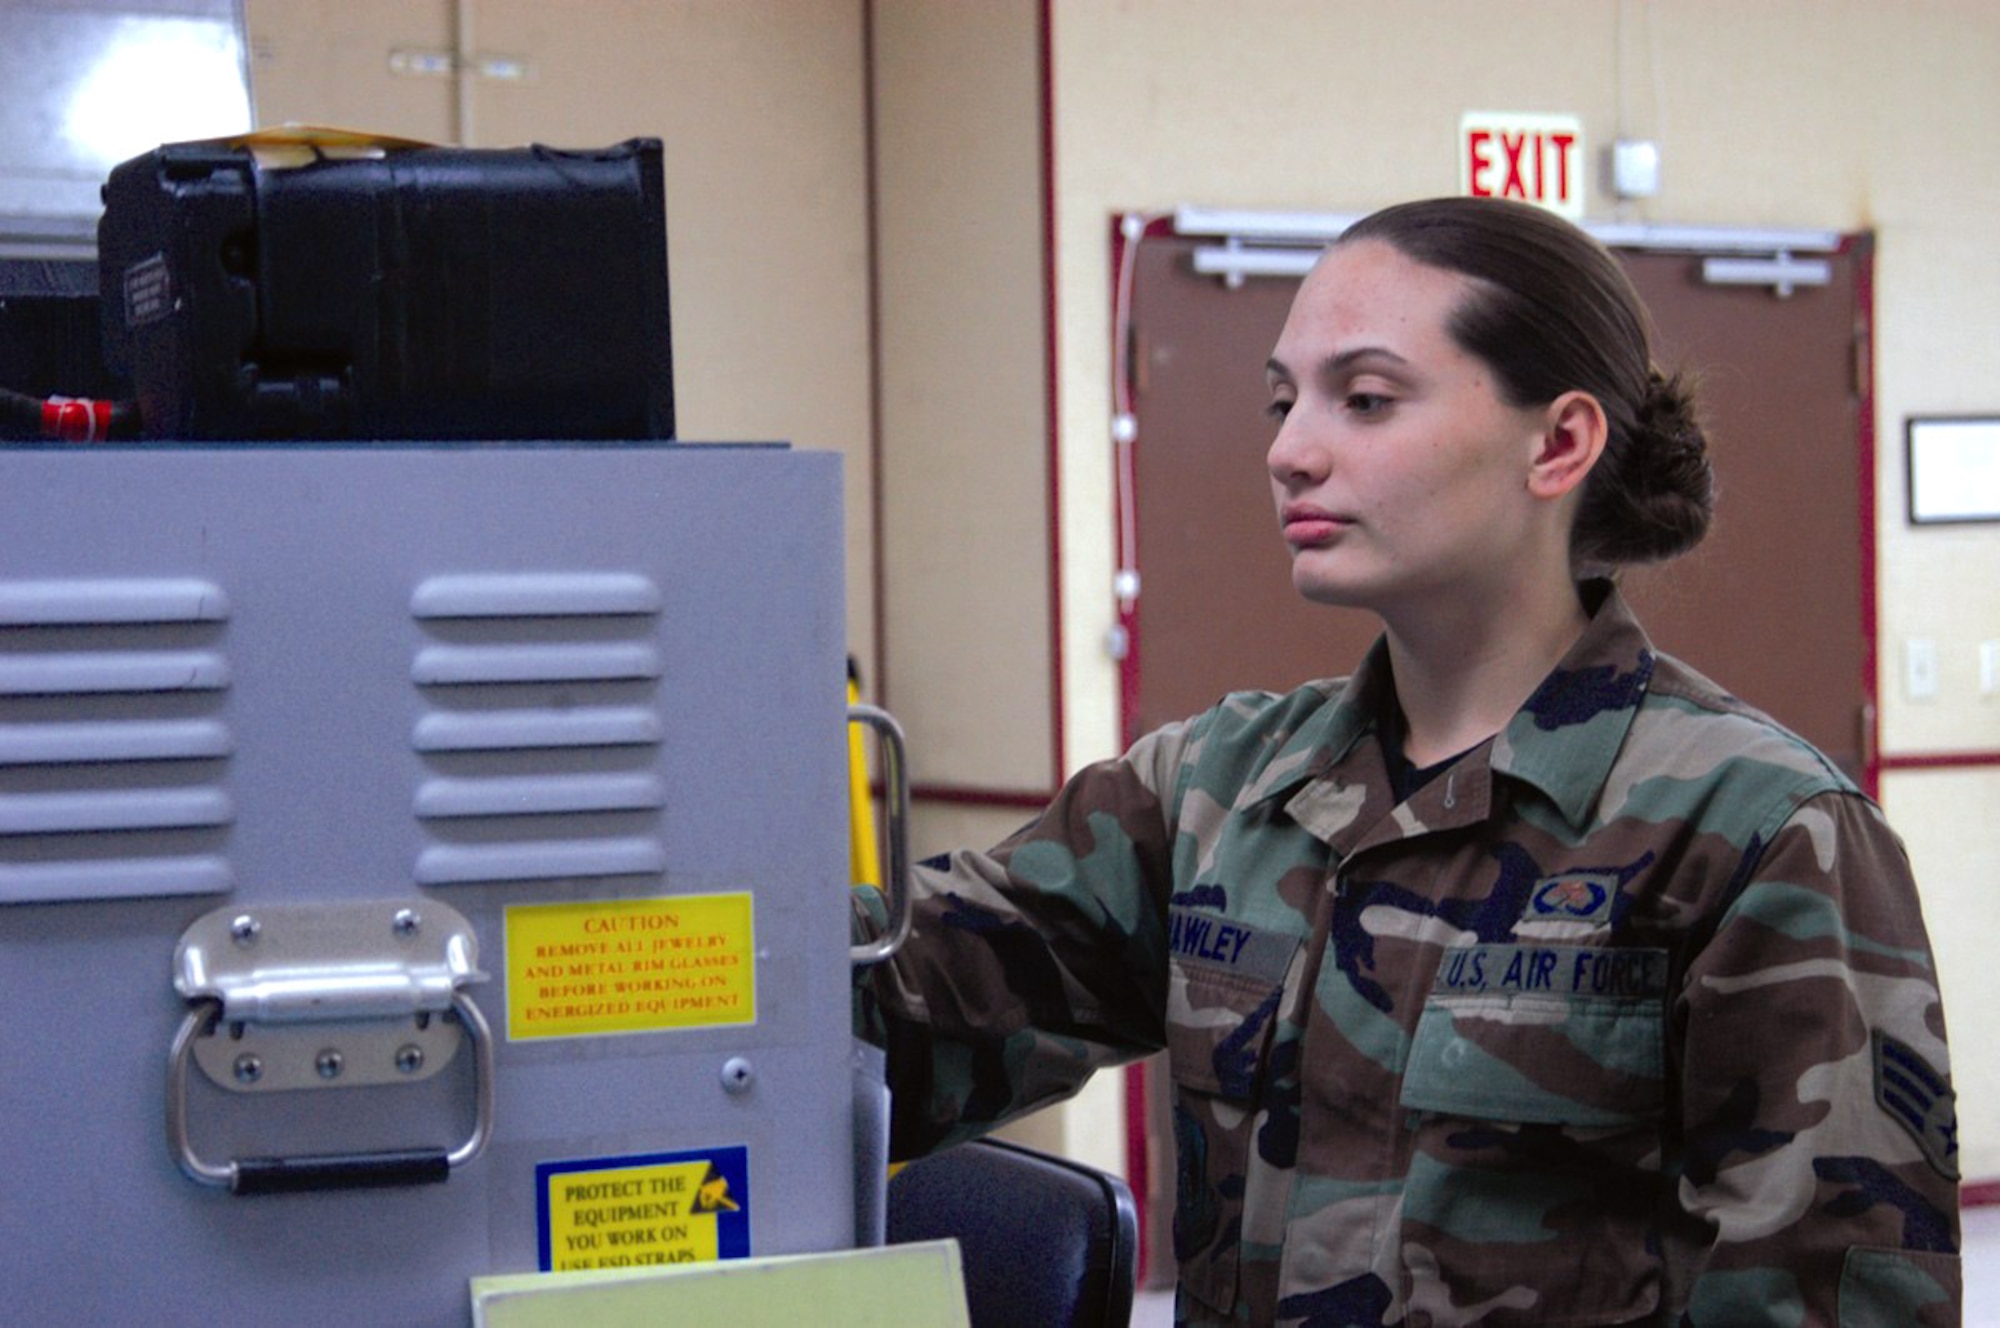 Senior Airman Sharon Howley, an integrated avionics mechanic, works with the T-38 flight director system test set. At age 19, Airman Howley is the youngest of more than 9,100 graduates earning their degrees in the October class of the Community College of the Air Force. She is also one of the youngest Airmen to earn a degree in the CCAF's 32-year history. Airman Howley is assigned to the 412th Maintenance Squadron at Edwards Air Force Base, Calif. (U.S. Air Force photo/Airman Stacy Garcia)
